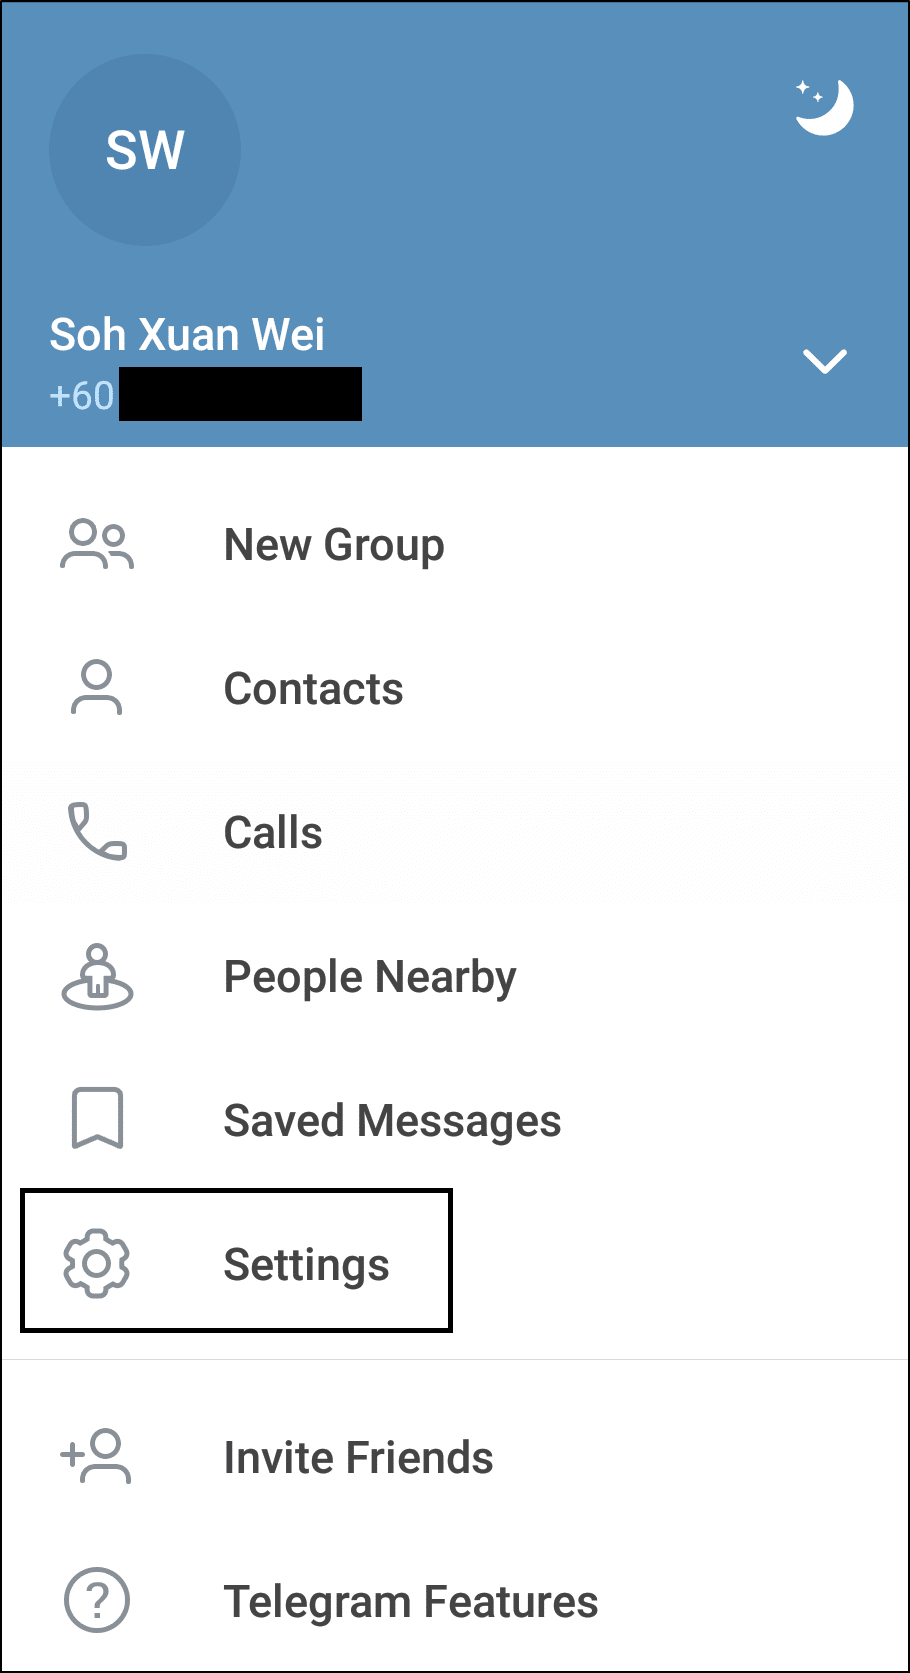 access the settings menu through the Telegram app on Android to contact support and fix notifications not working or showing